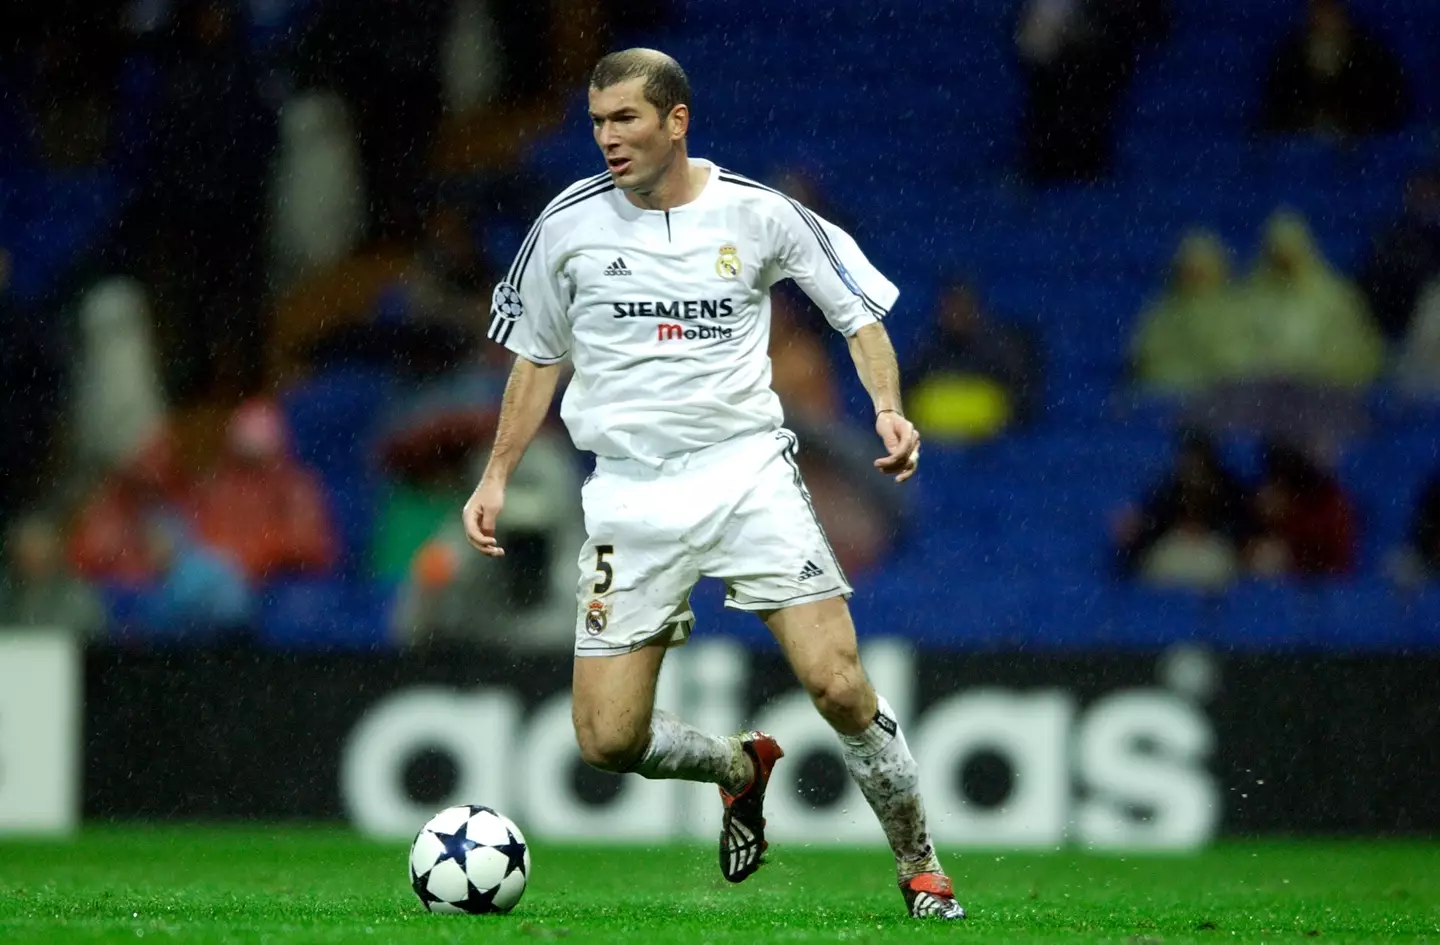 Zinedine Zidane pictured playing for Real Madrid (